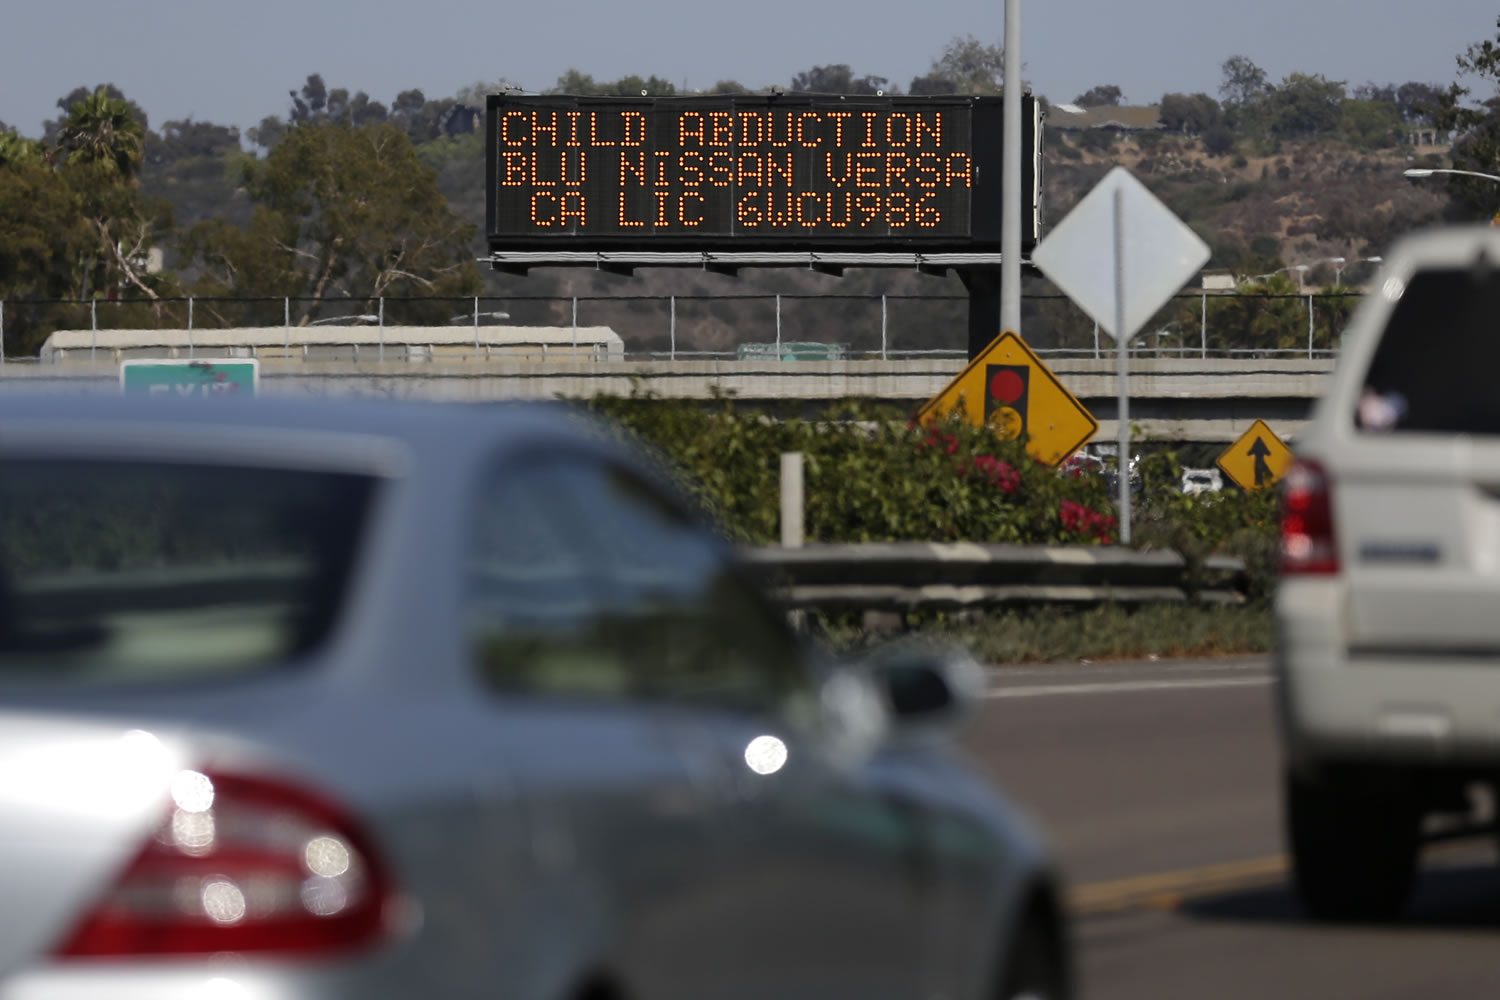 Drivers pass a display showing an Amber Alert, asking motorists to be on the lookout for a specific vehicle Tuesday in San Diego.